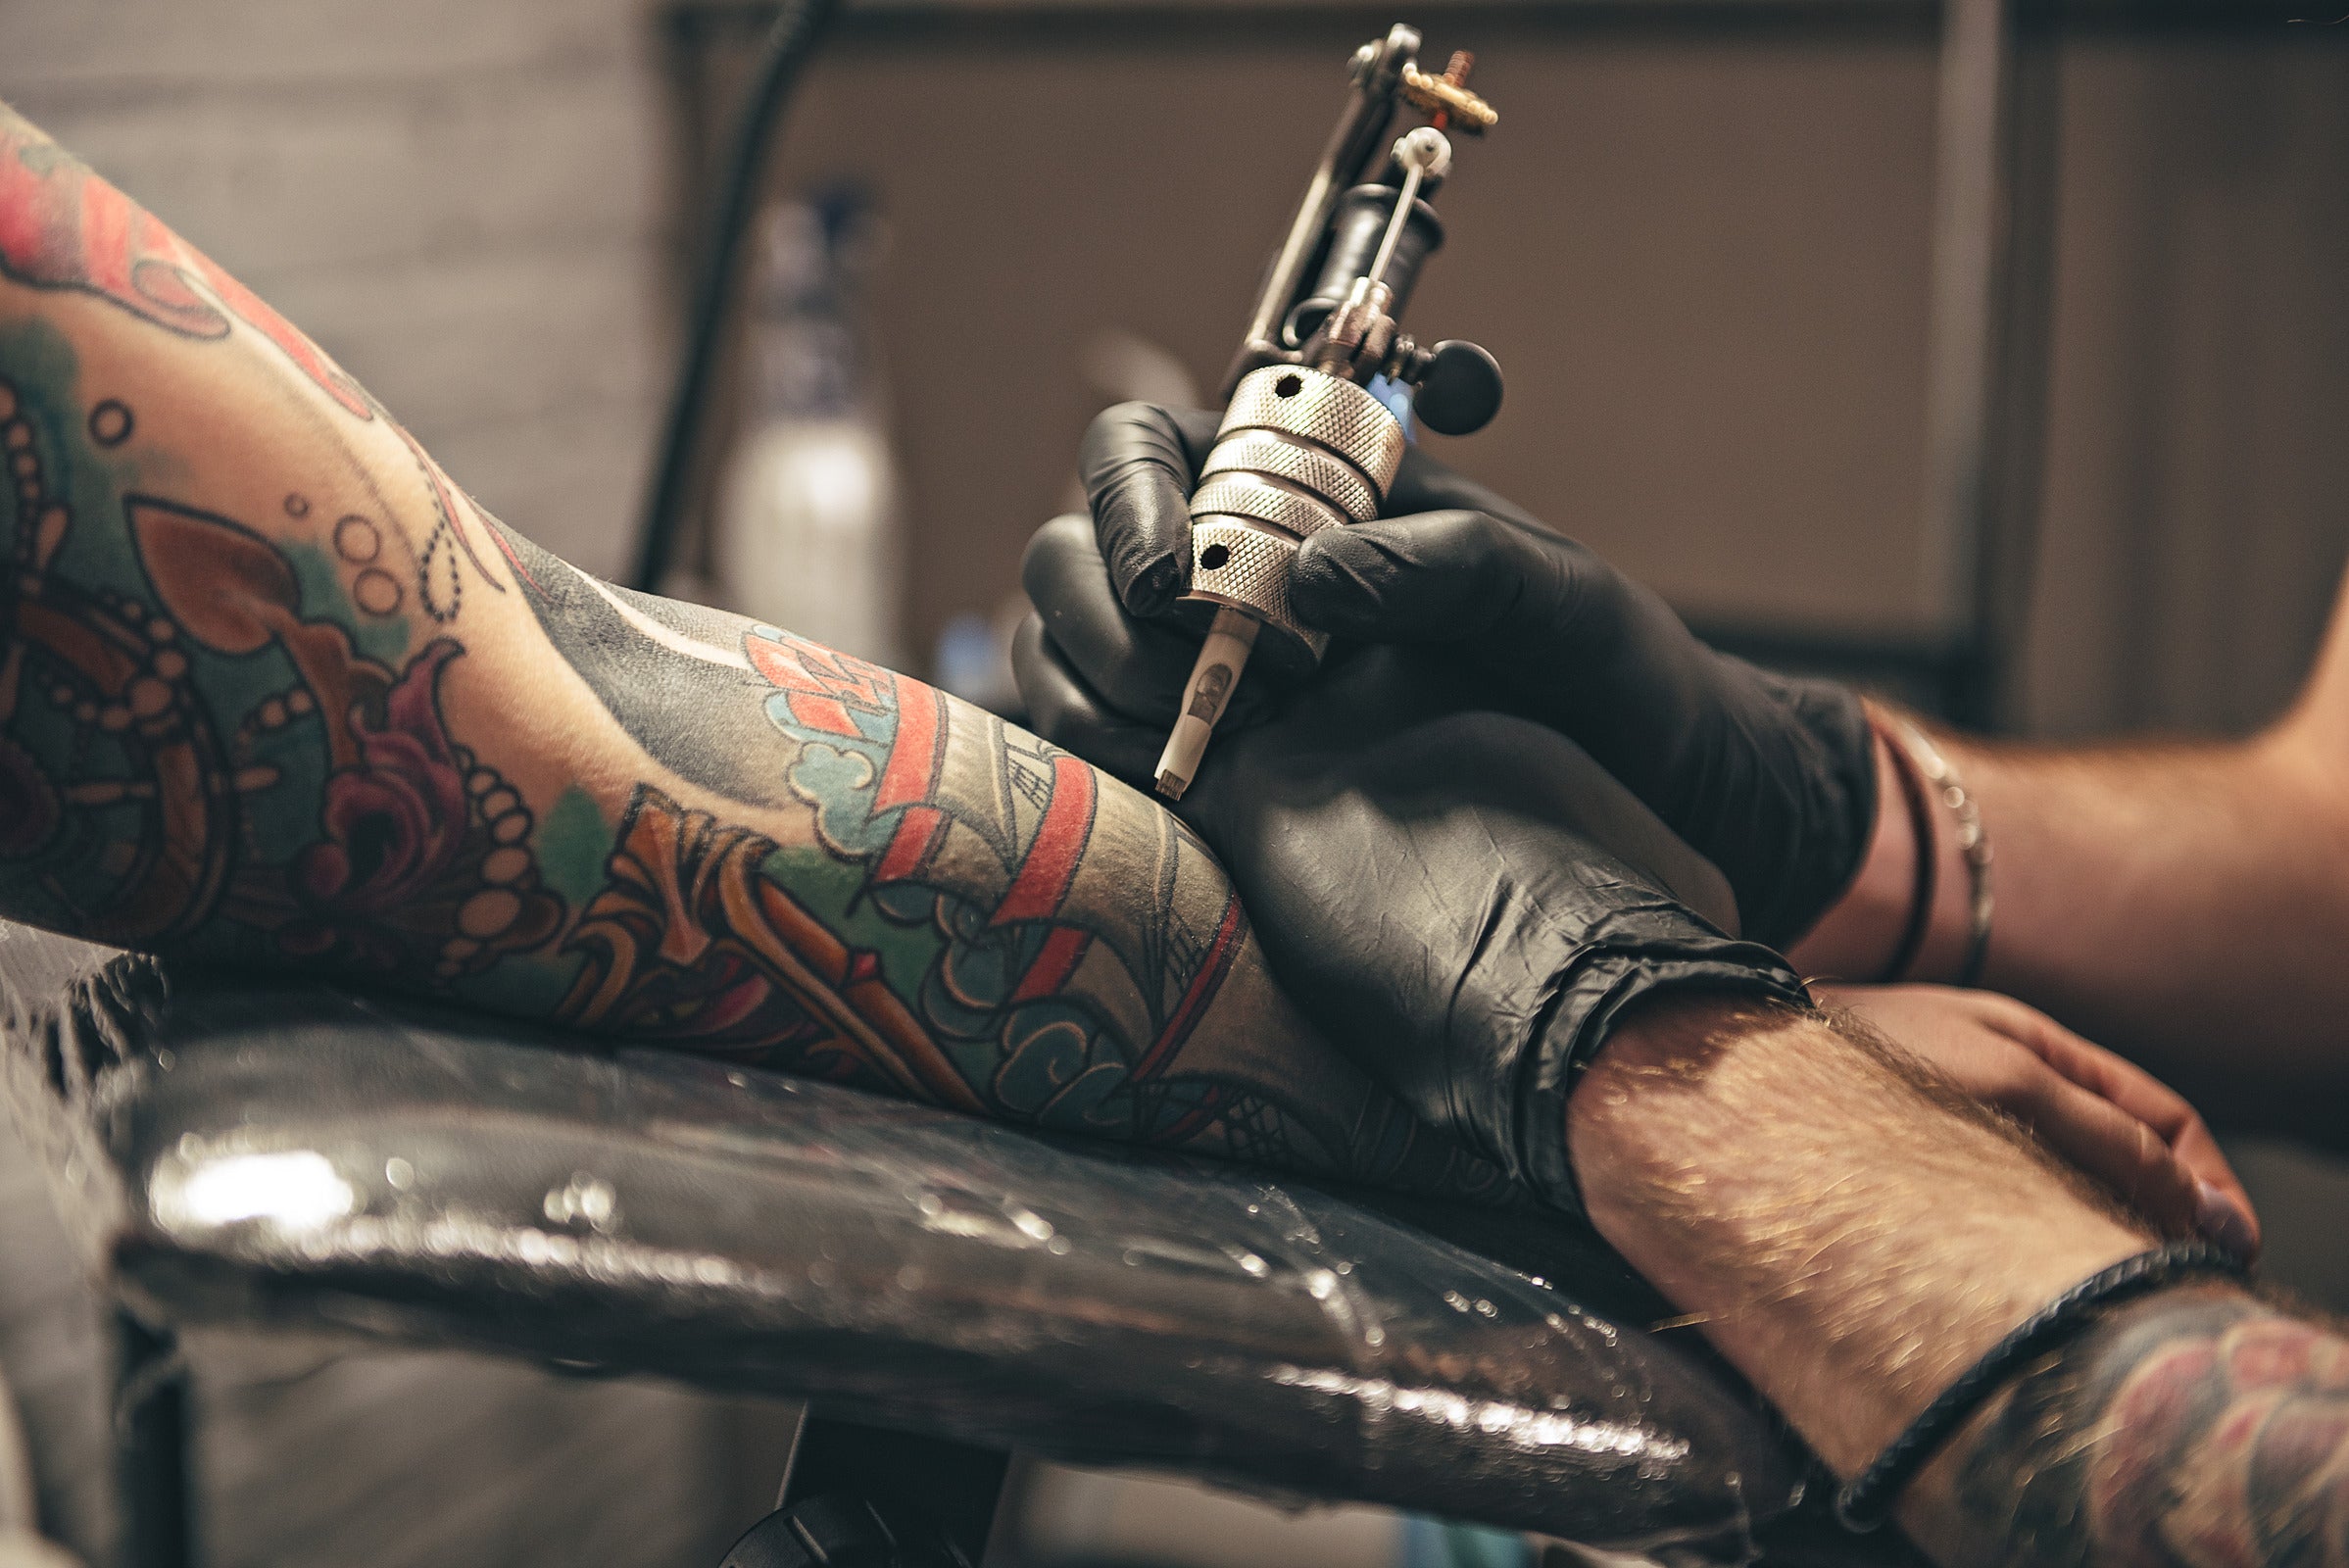 Factors affecting the shine of tattoos